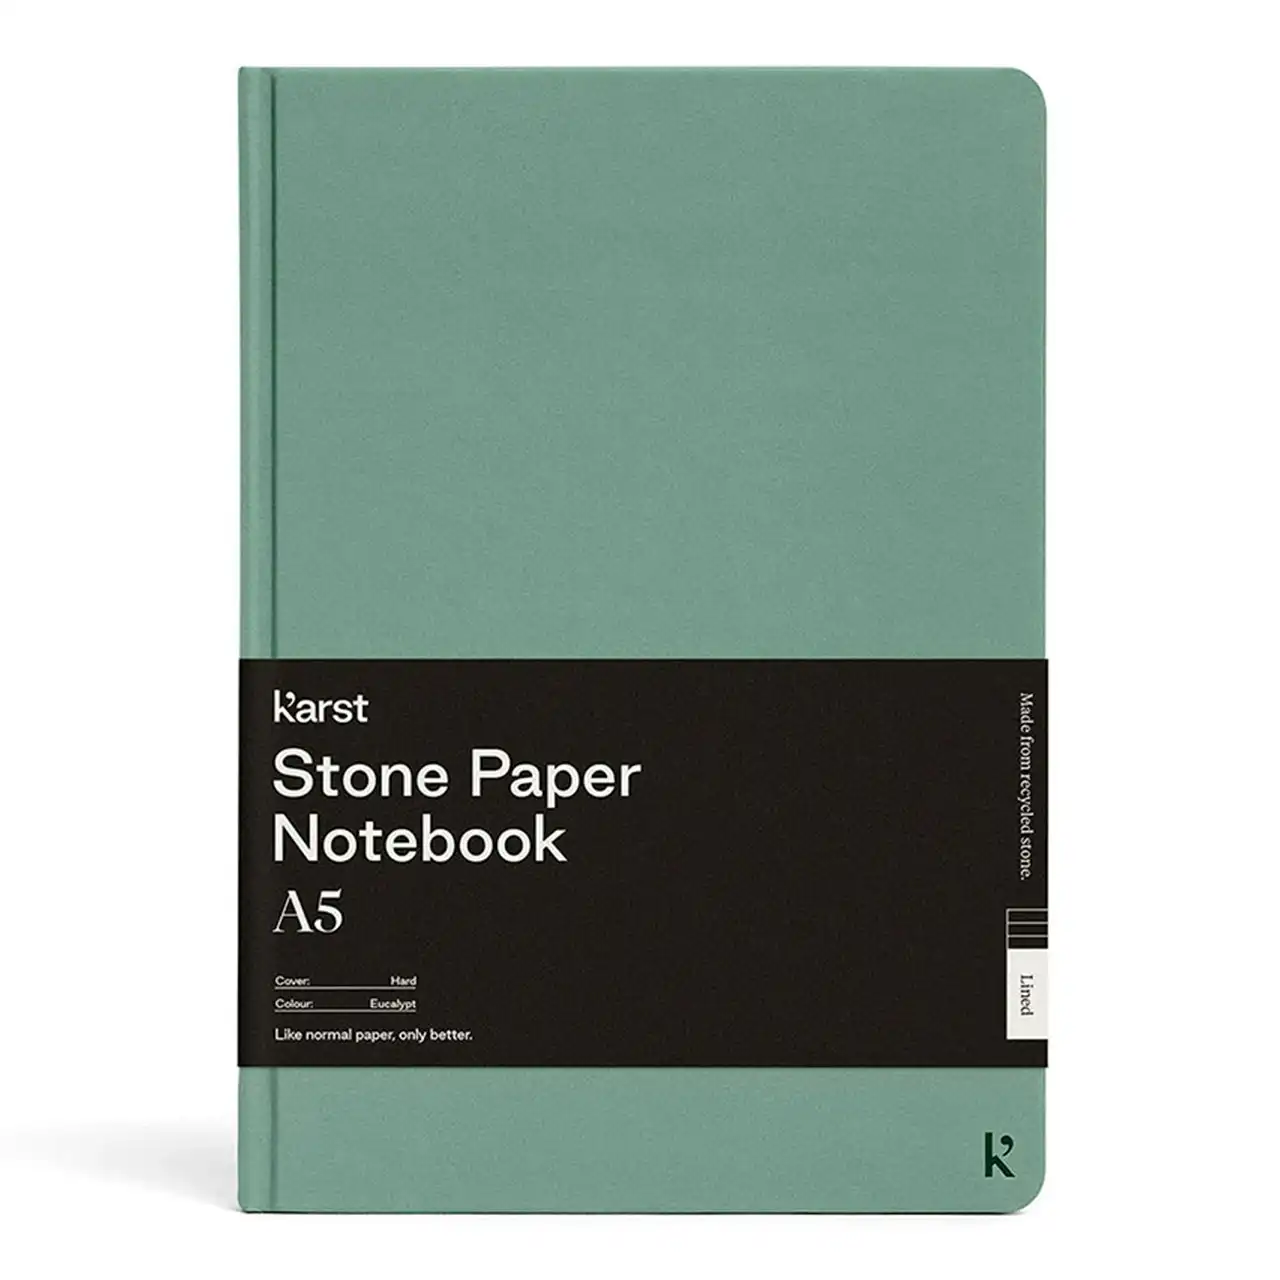 Karst Plain A5 Hard Cover Notebook Writing Paper 144 Pages Journal Eucalypt